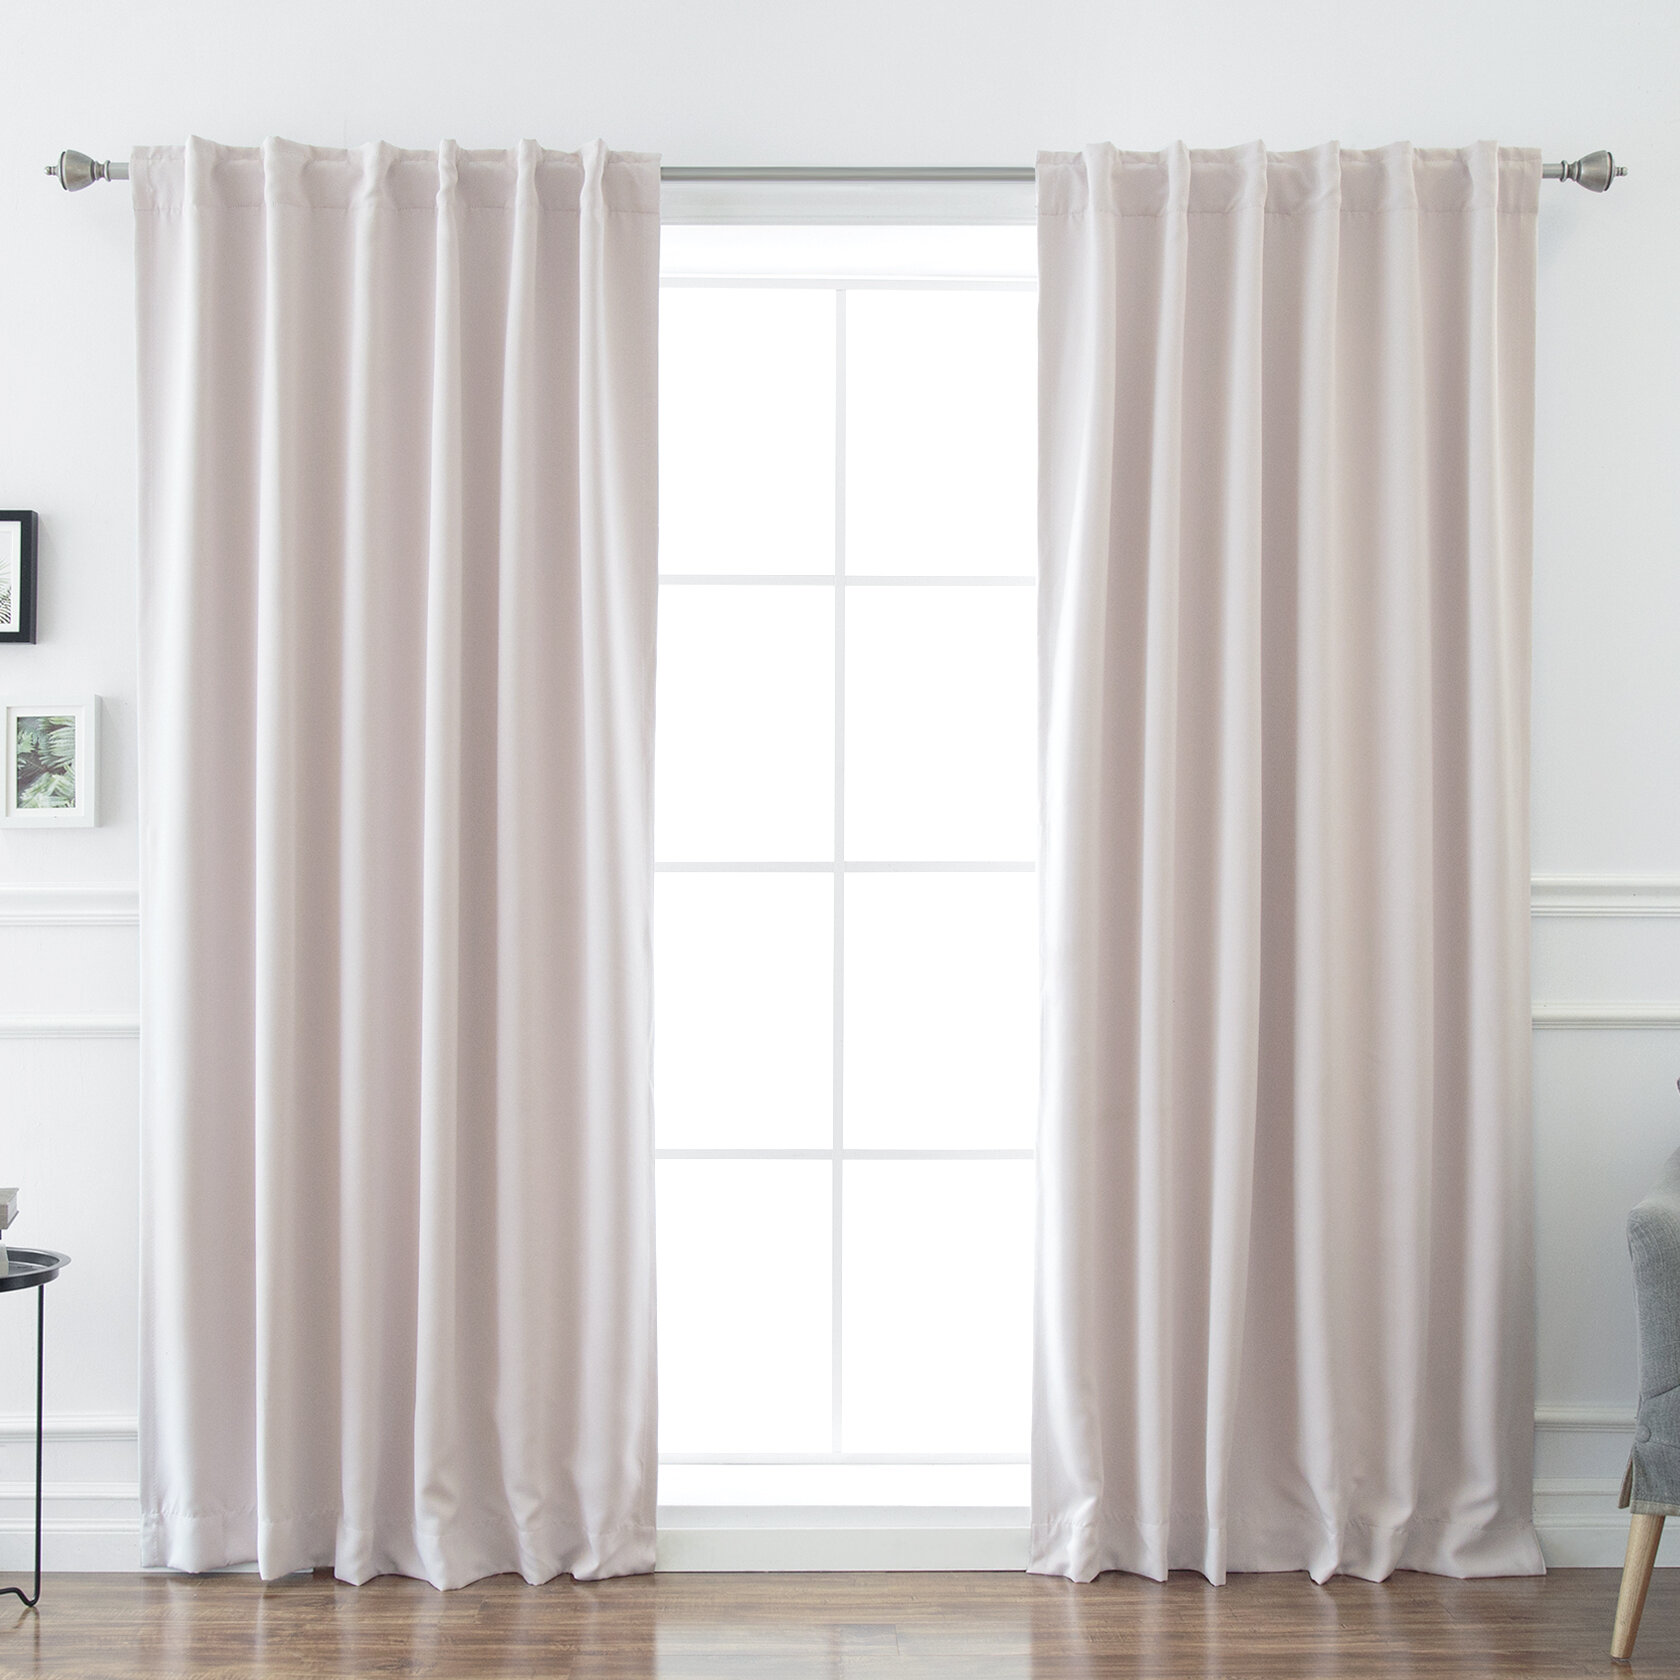 20 - 30 Width Pink Curtains & Drapes You'll Love